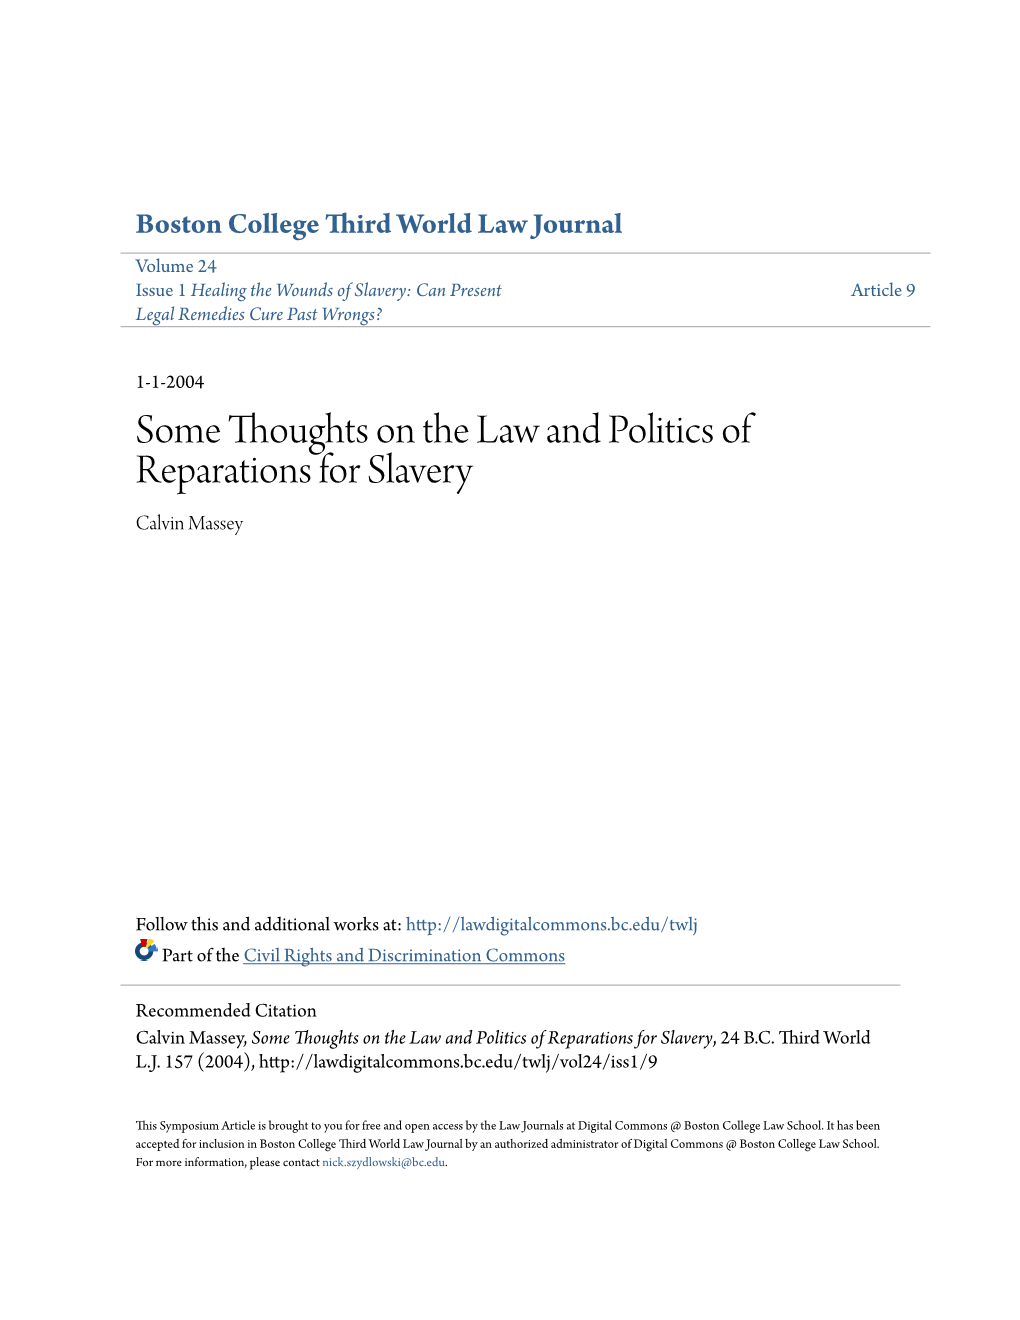 Some Thoughts on the Law and Politics of Reparations for Slavery Calvin Massey